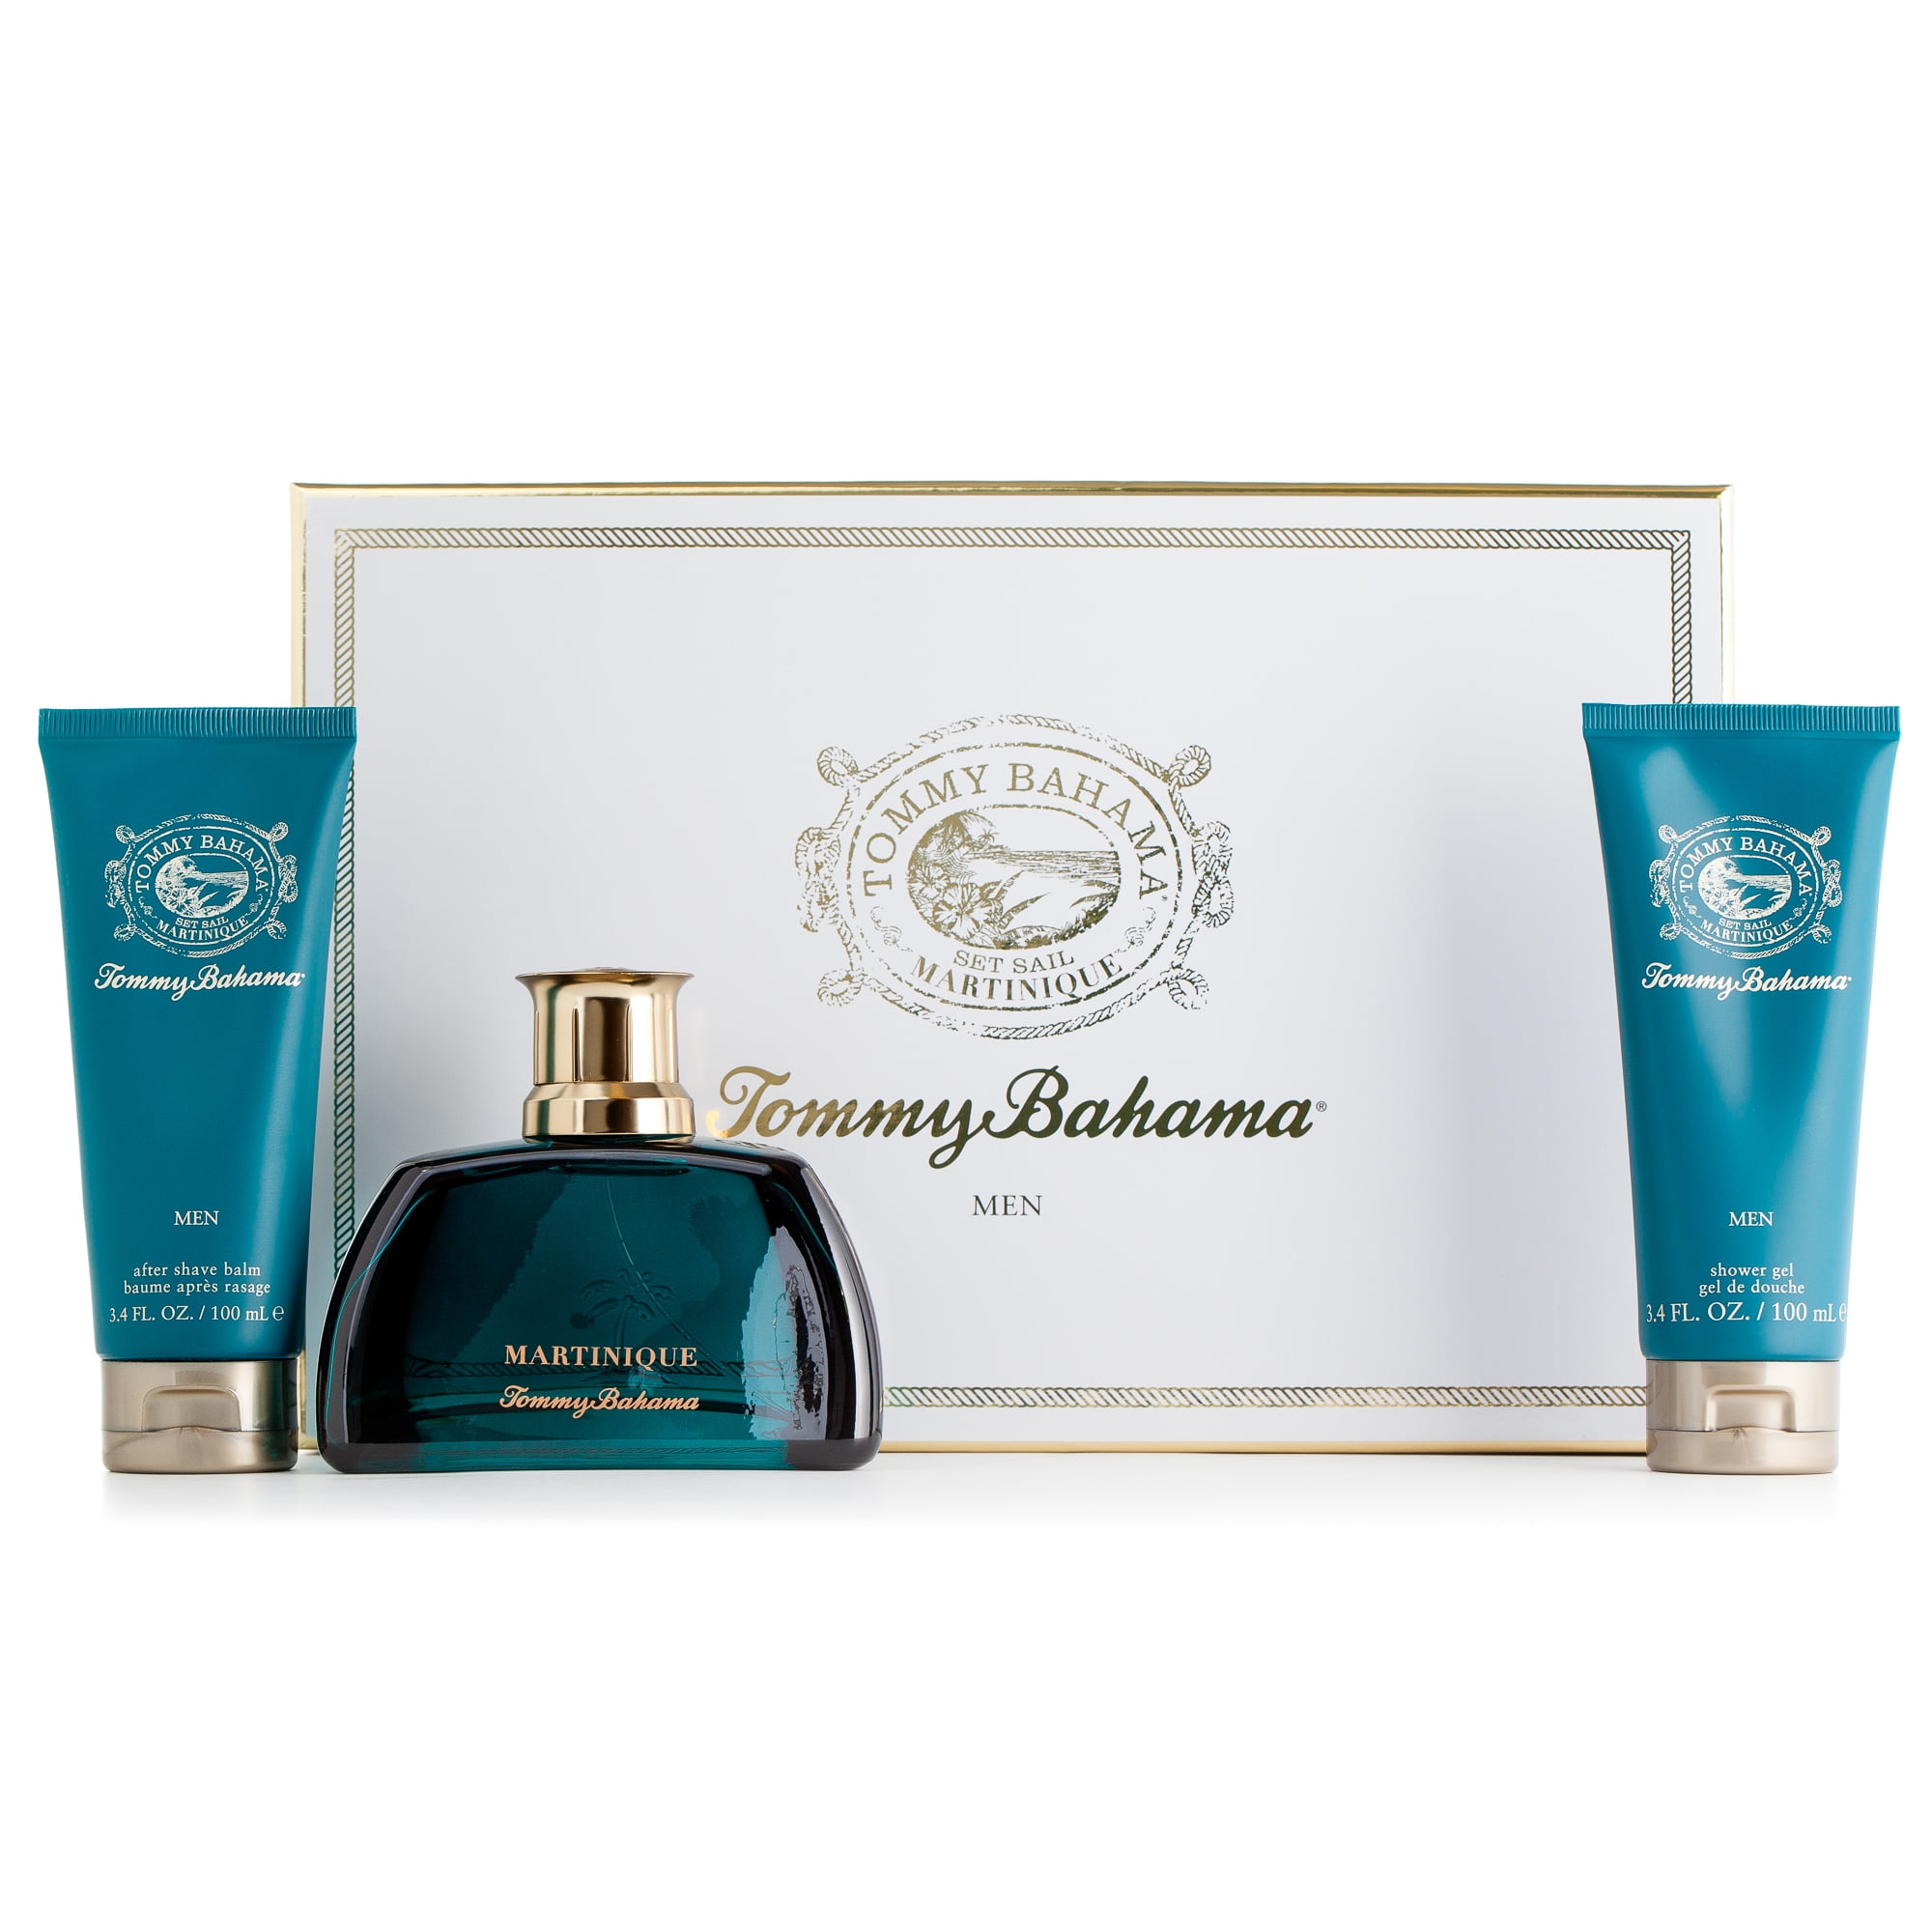 tommy bahama martinique review